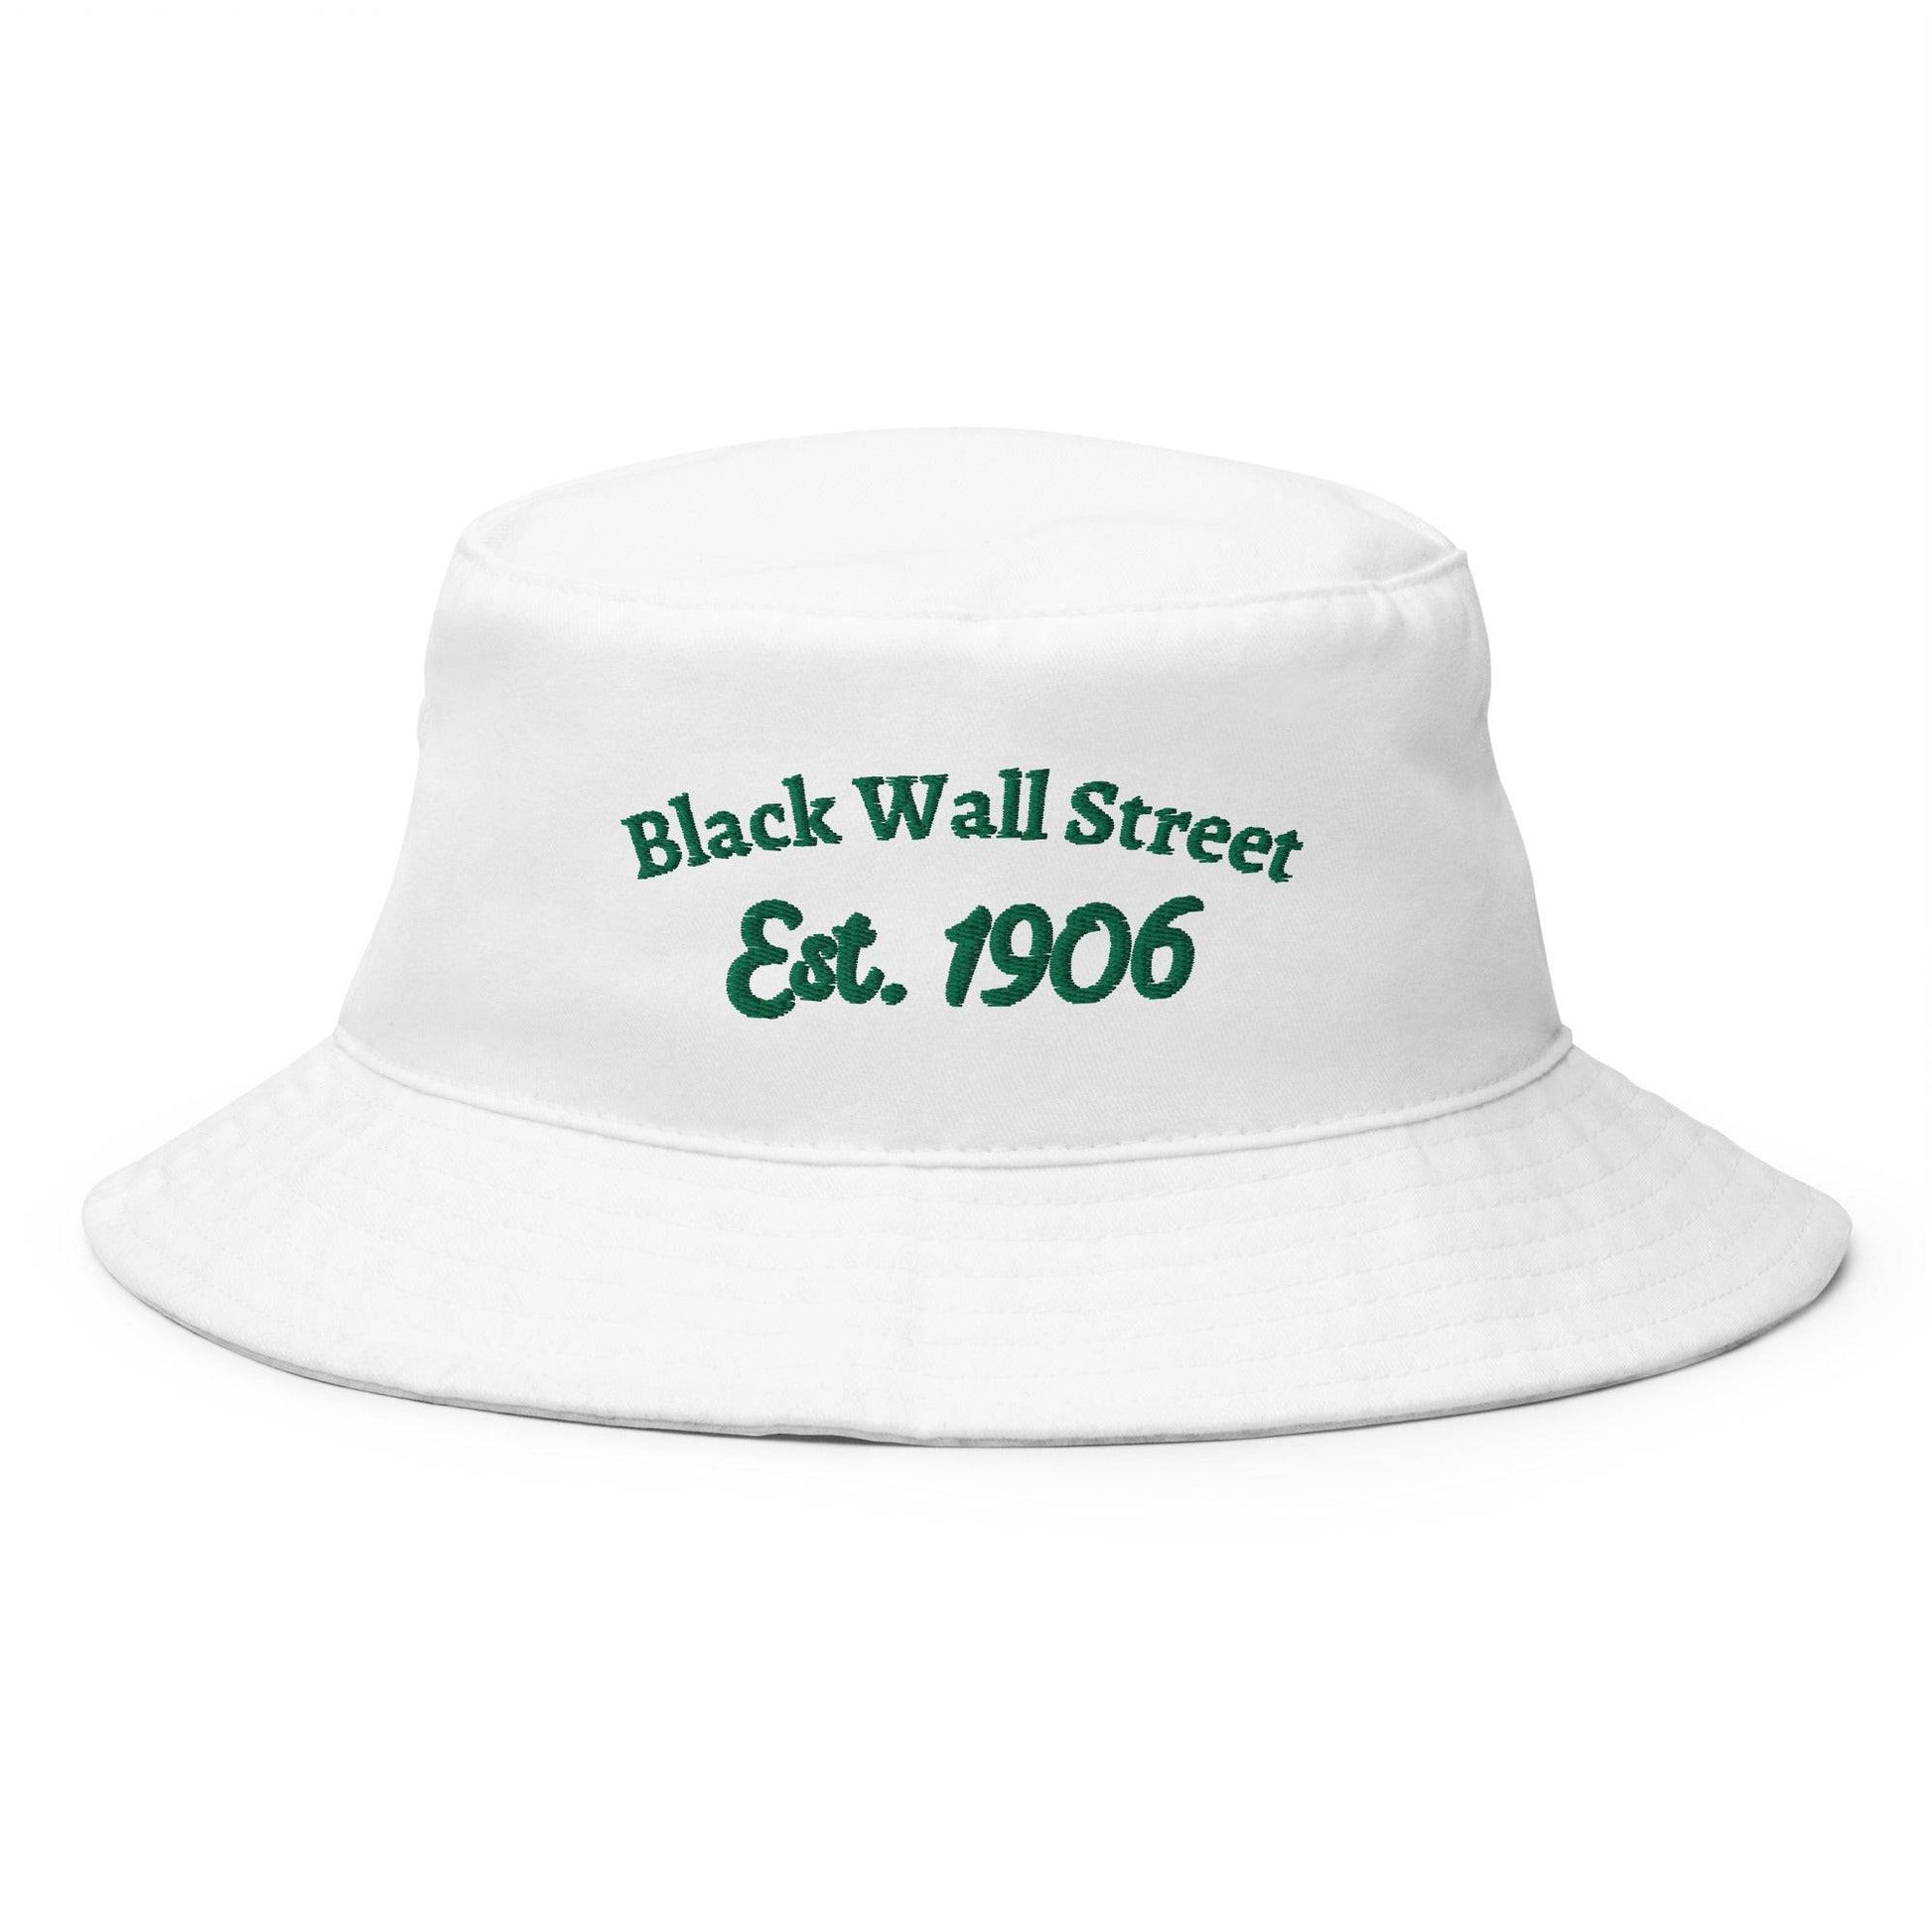 white bucket hat with black wall street est 1906 embroider on it